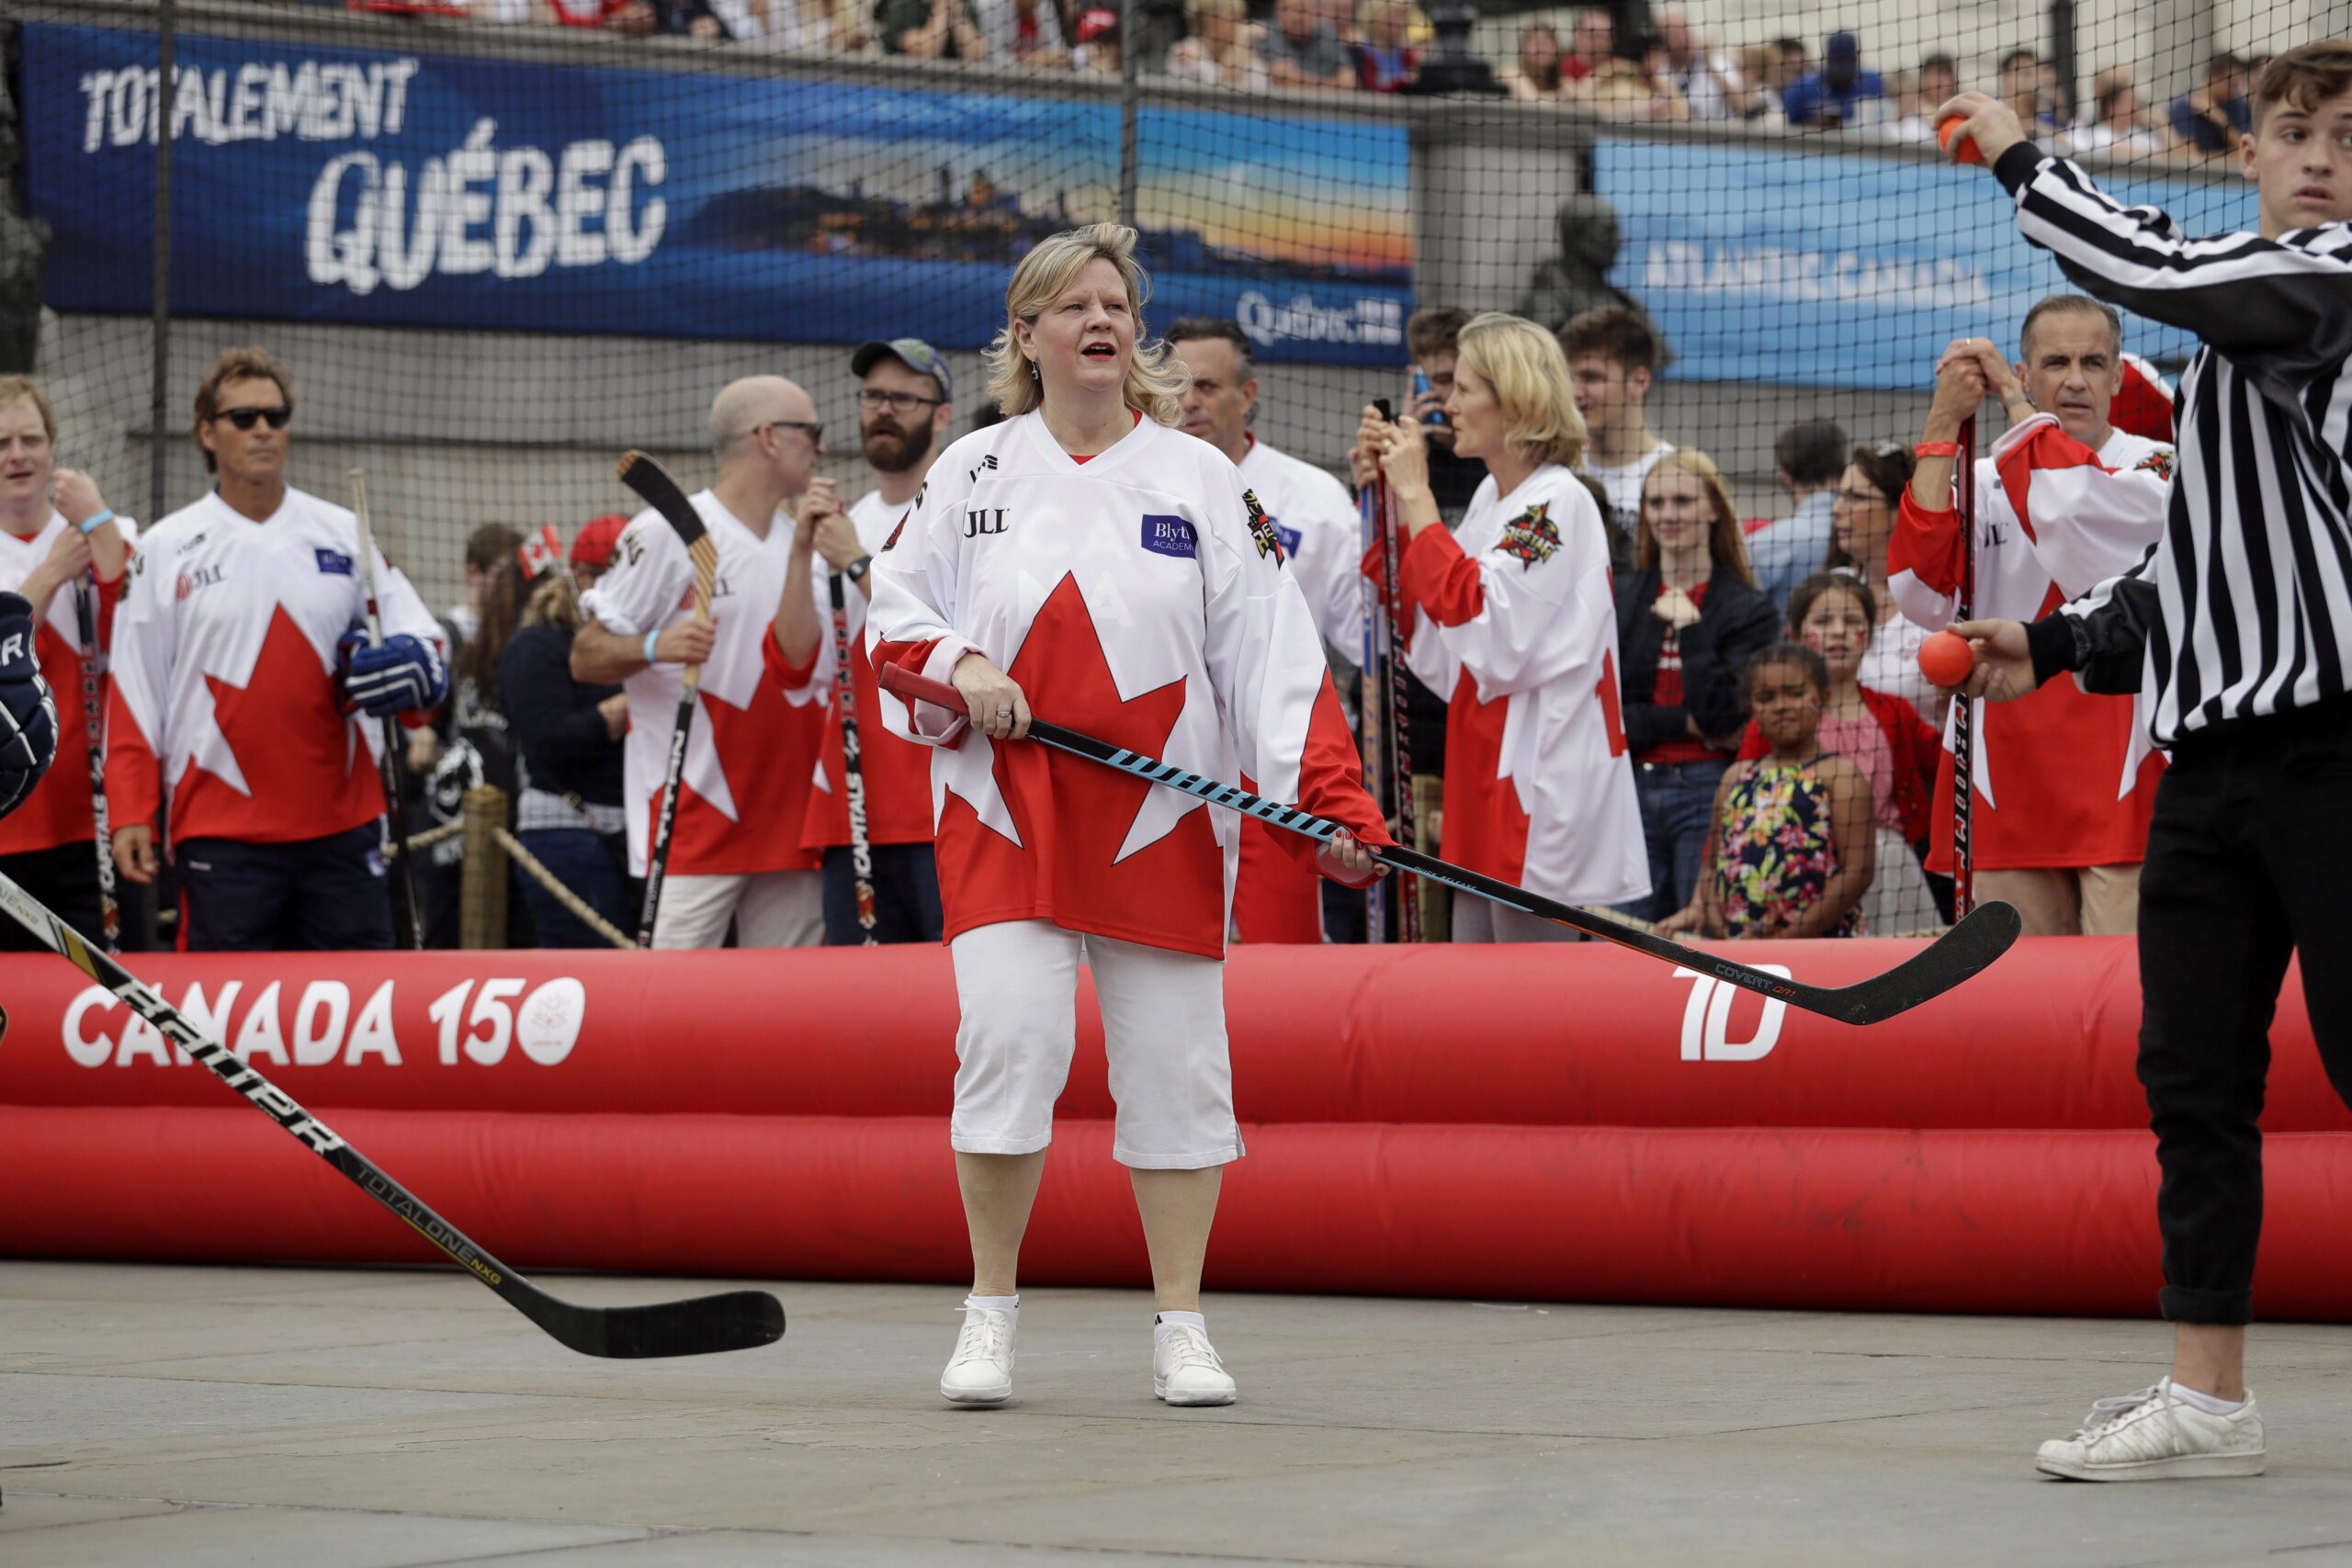 Charette is standing in an inflatable “rink” whose border is red and says “Canada 150” on it. She and her teammates are dressed in red and white jerseys with a large maple leaf motif. Her calf-length pants are white, and her sneakers are white. She’s holding a hockey stick. Many spectators sit in bleachers in the background.